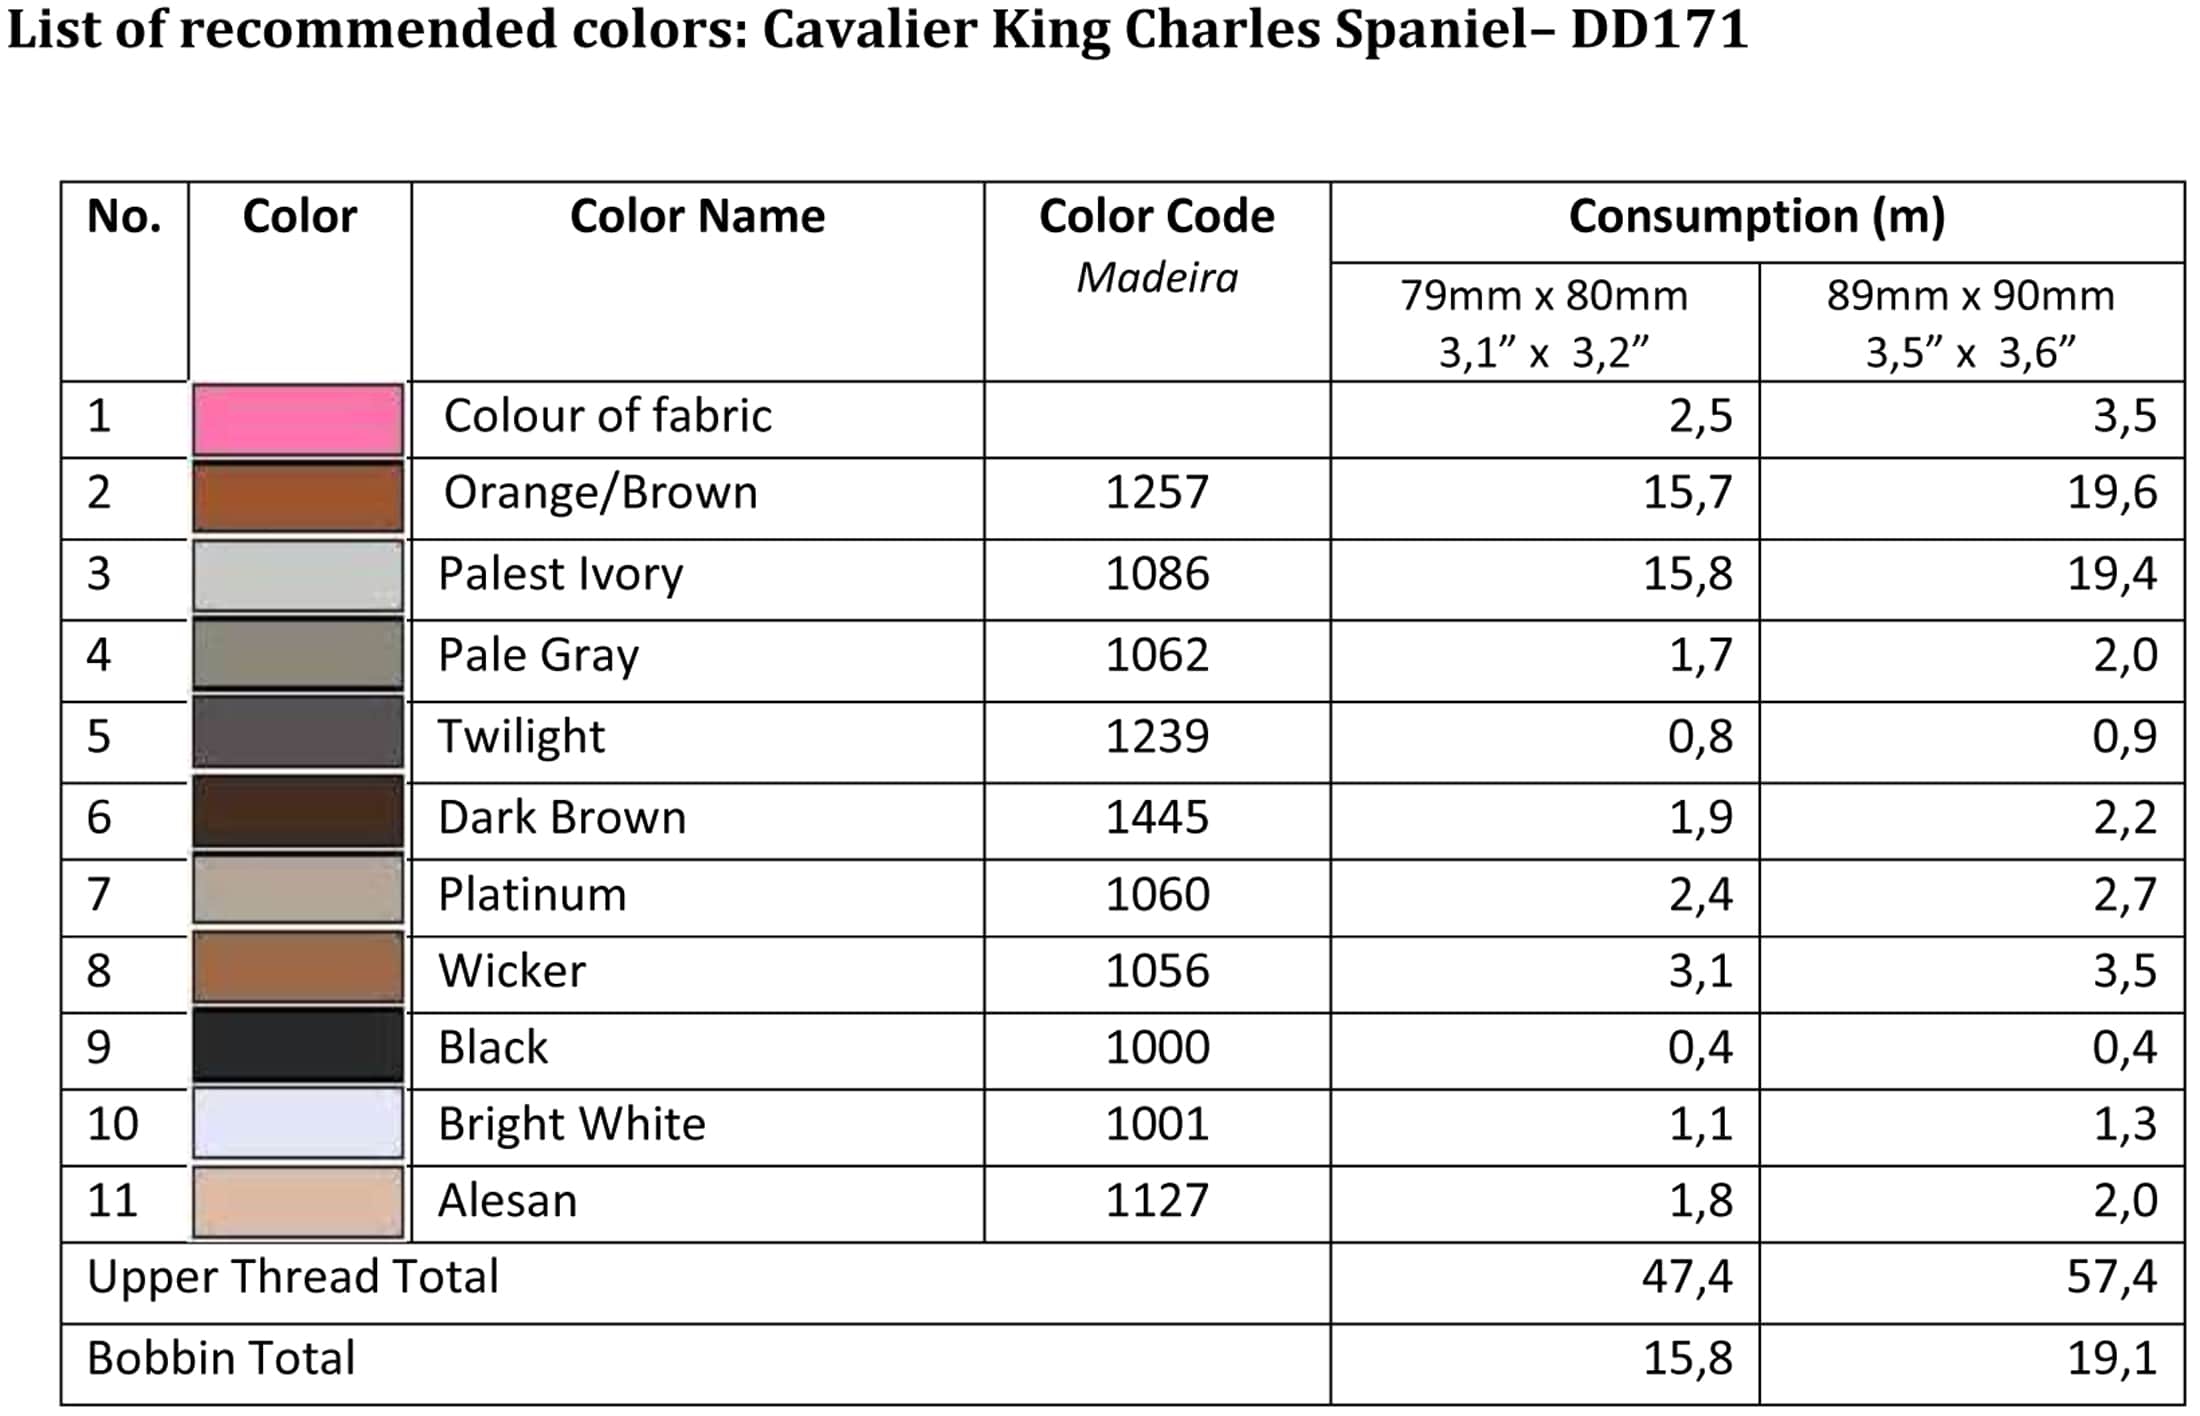 List of recommended colors - DD171